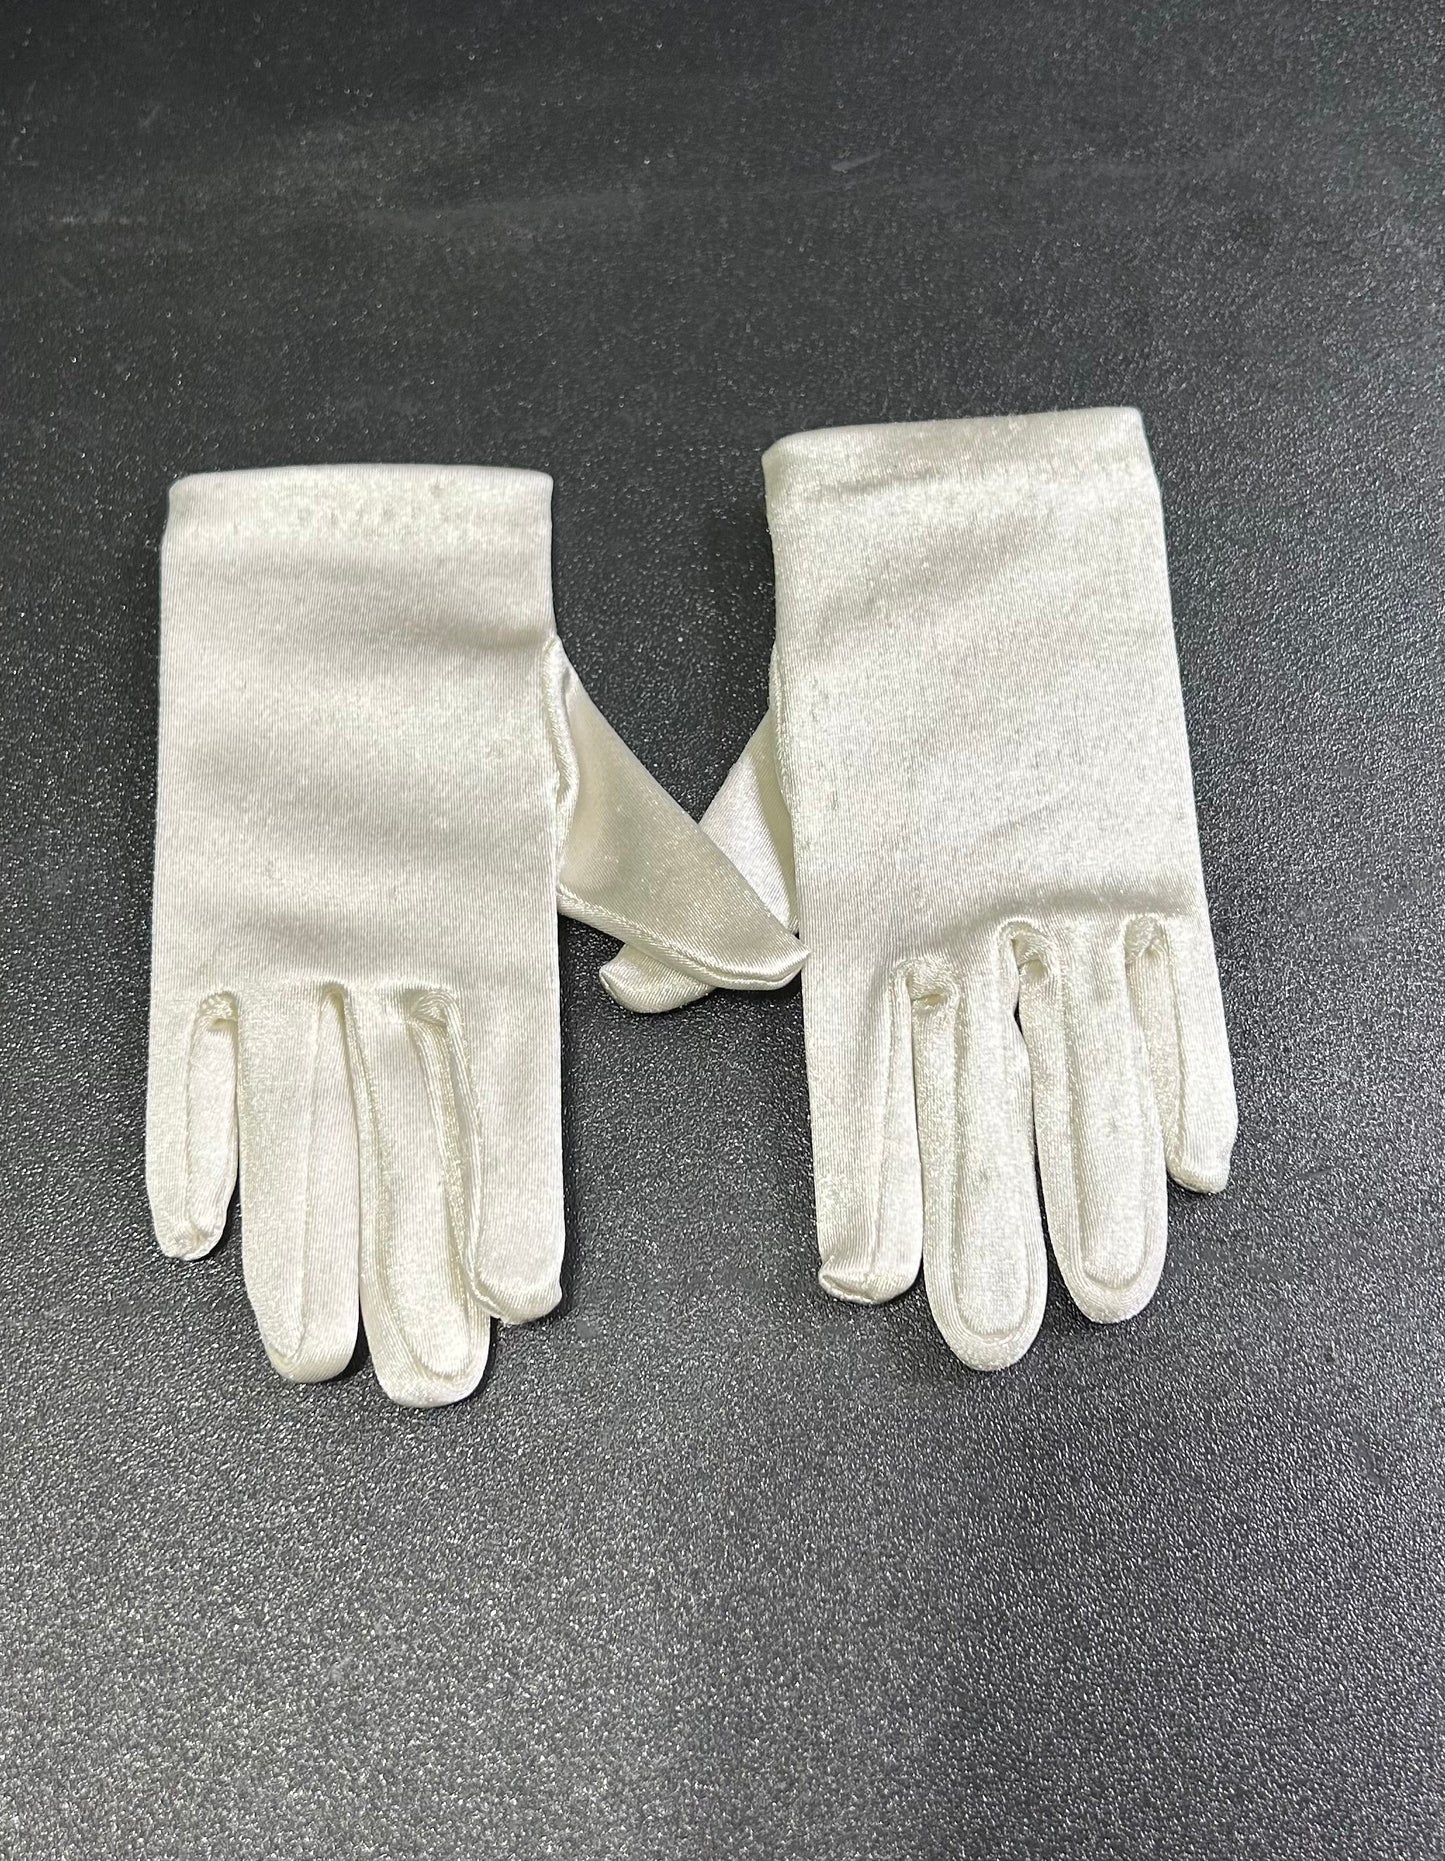 Theatrical Gloves Opera Elbow and Short